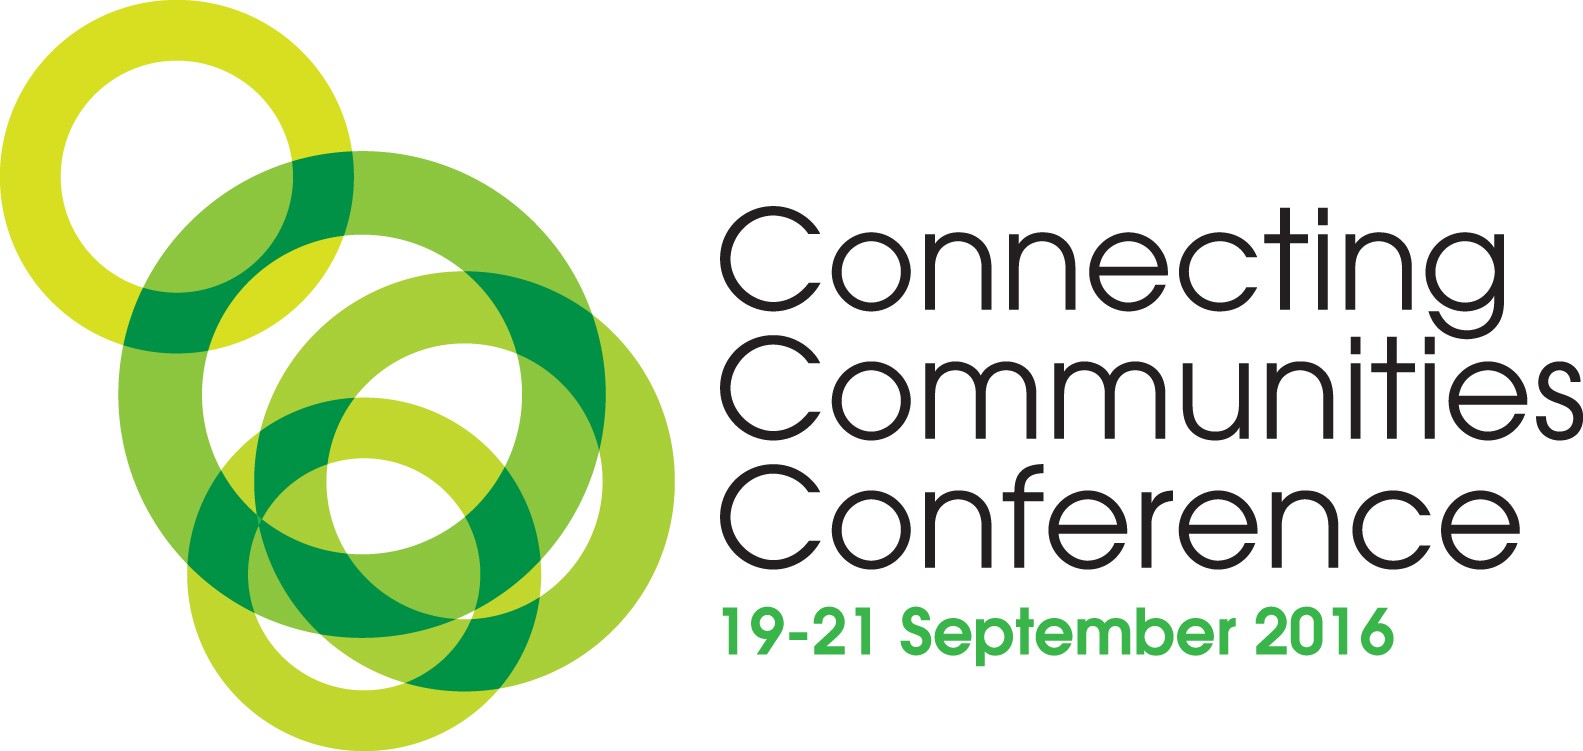 Connecting Communities Conference 2016